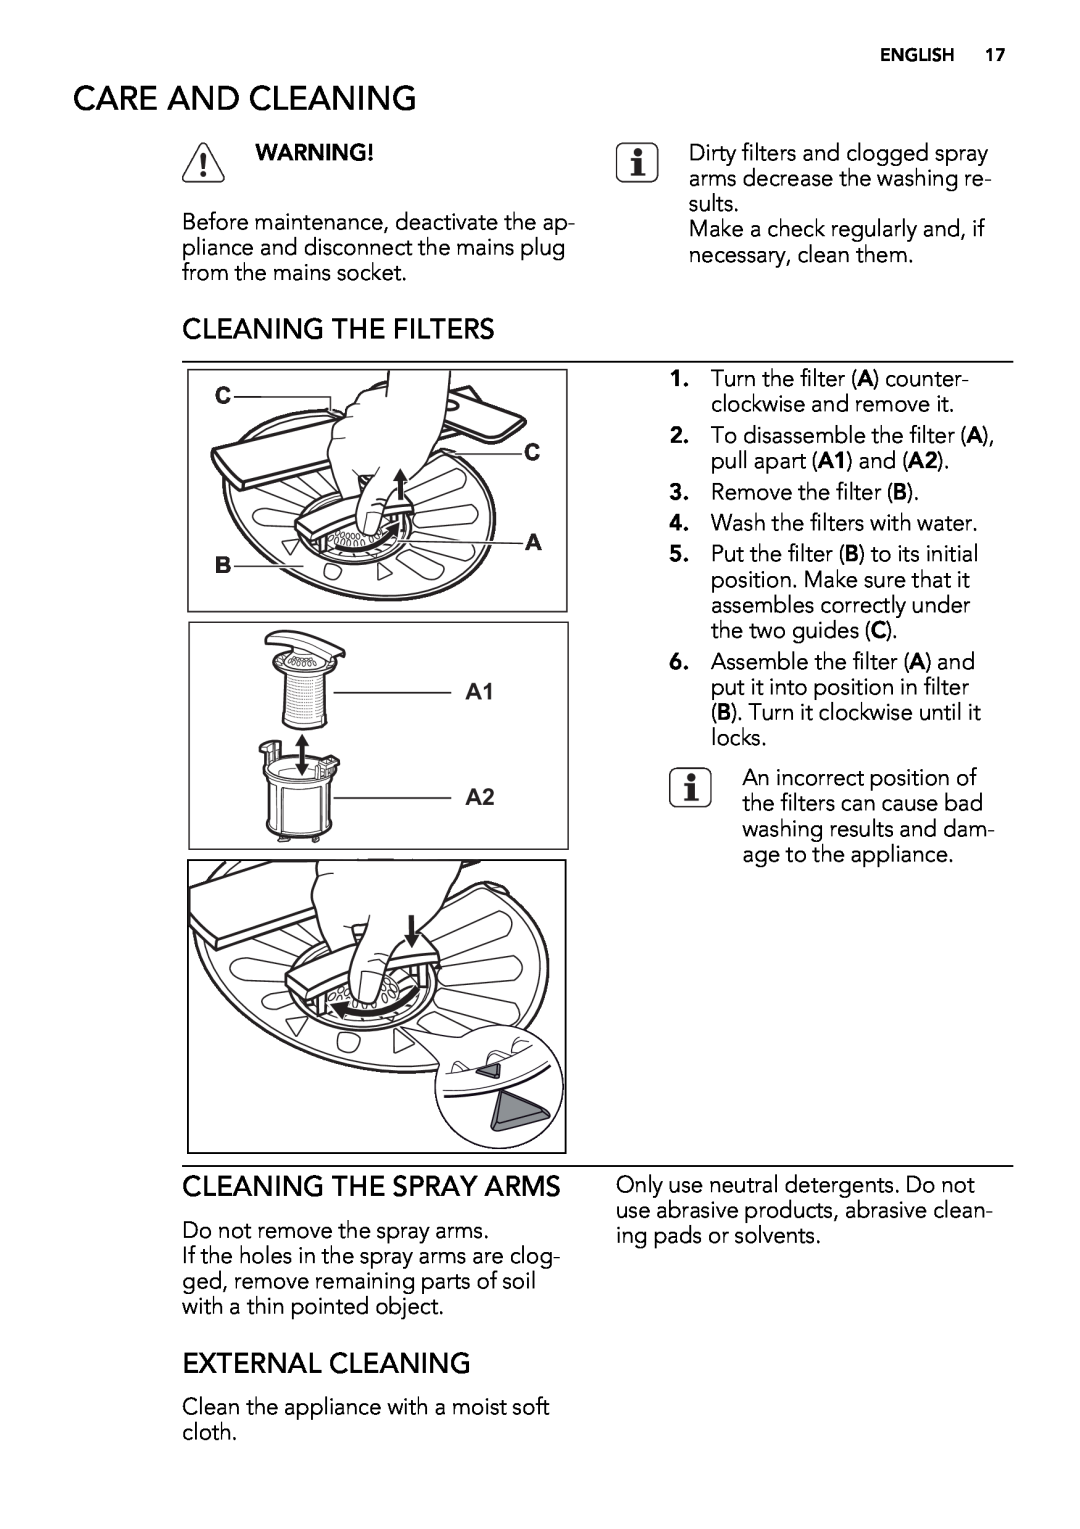 AEG 88009 user manual Care And Cleaning, Cleaning The Filters, Cleaning The Spray Arms, External Cleaning 